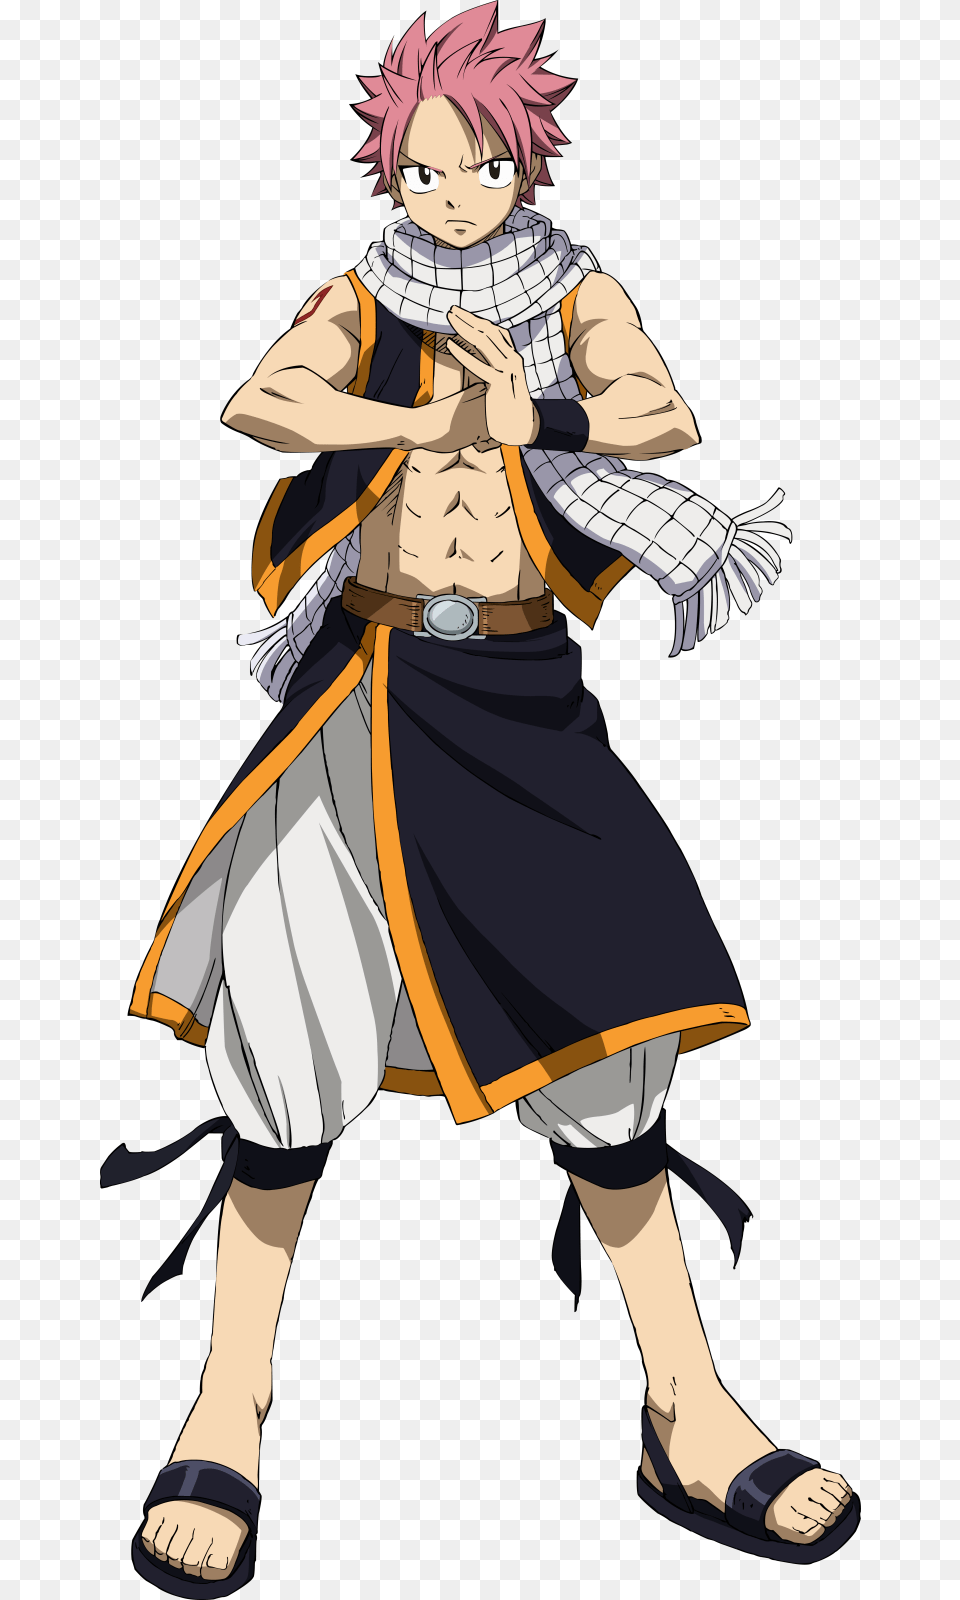 Fairy Tail Natsu Dragneel Cosplay Costume Fairy Tail Natsu Outfit, Publication, Book, Comics, Adult Free Png